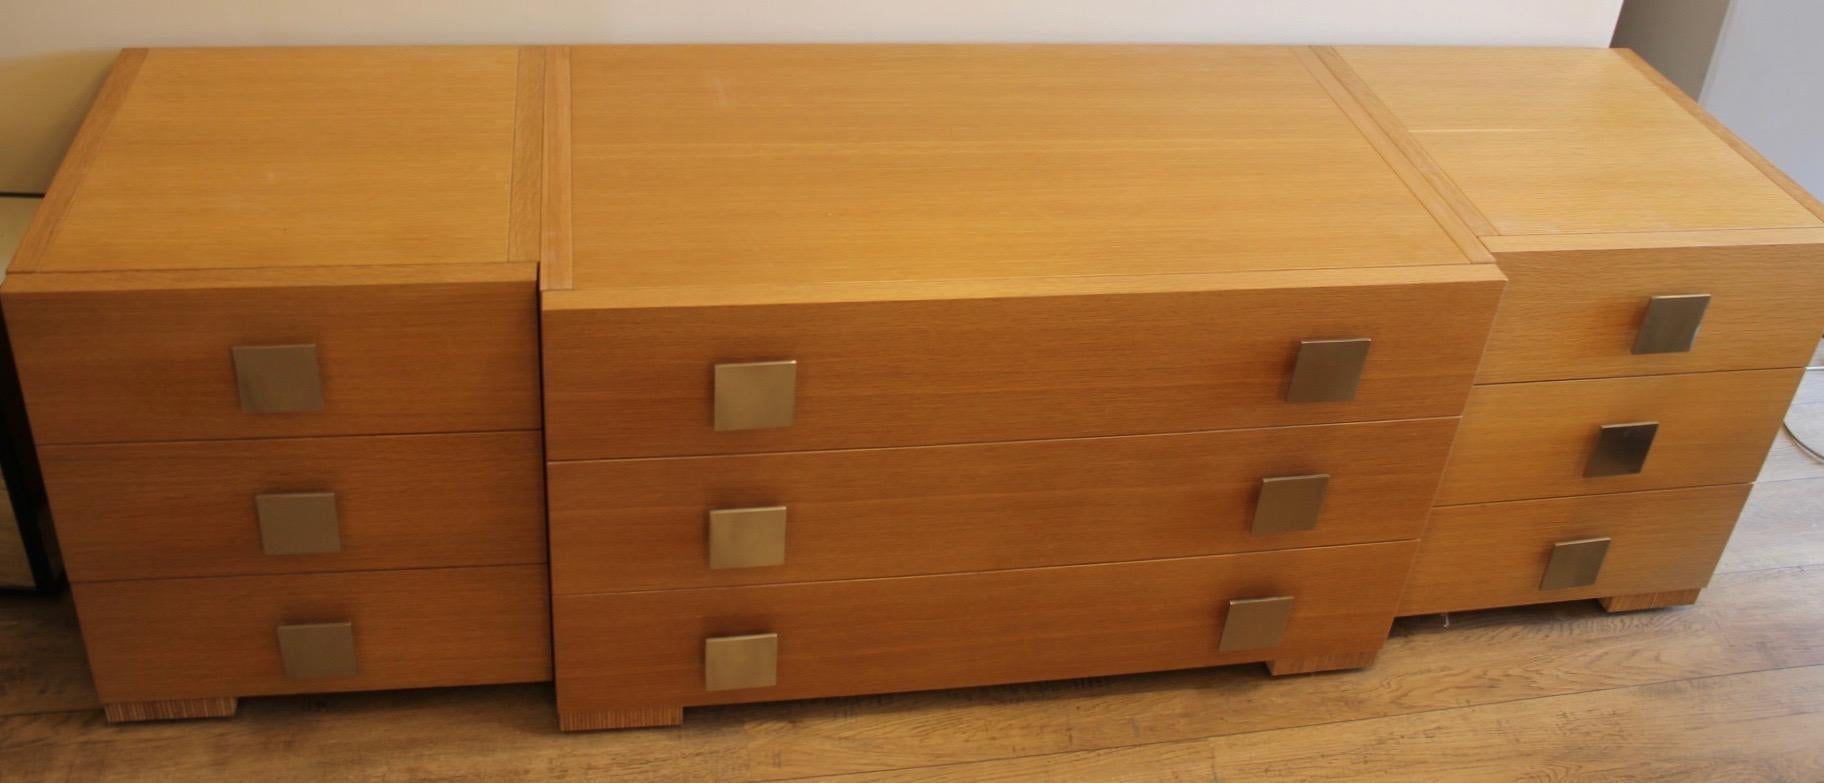 Convenient sideboard very beautifully made in Ash veneer with a 3 cm thick travertine top. 9 drawers on the front with 6 metal handles.
It’s a sideboard that goes very well in a living room or bedroom.
It is of high quality Italian manufacturing